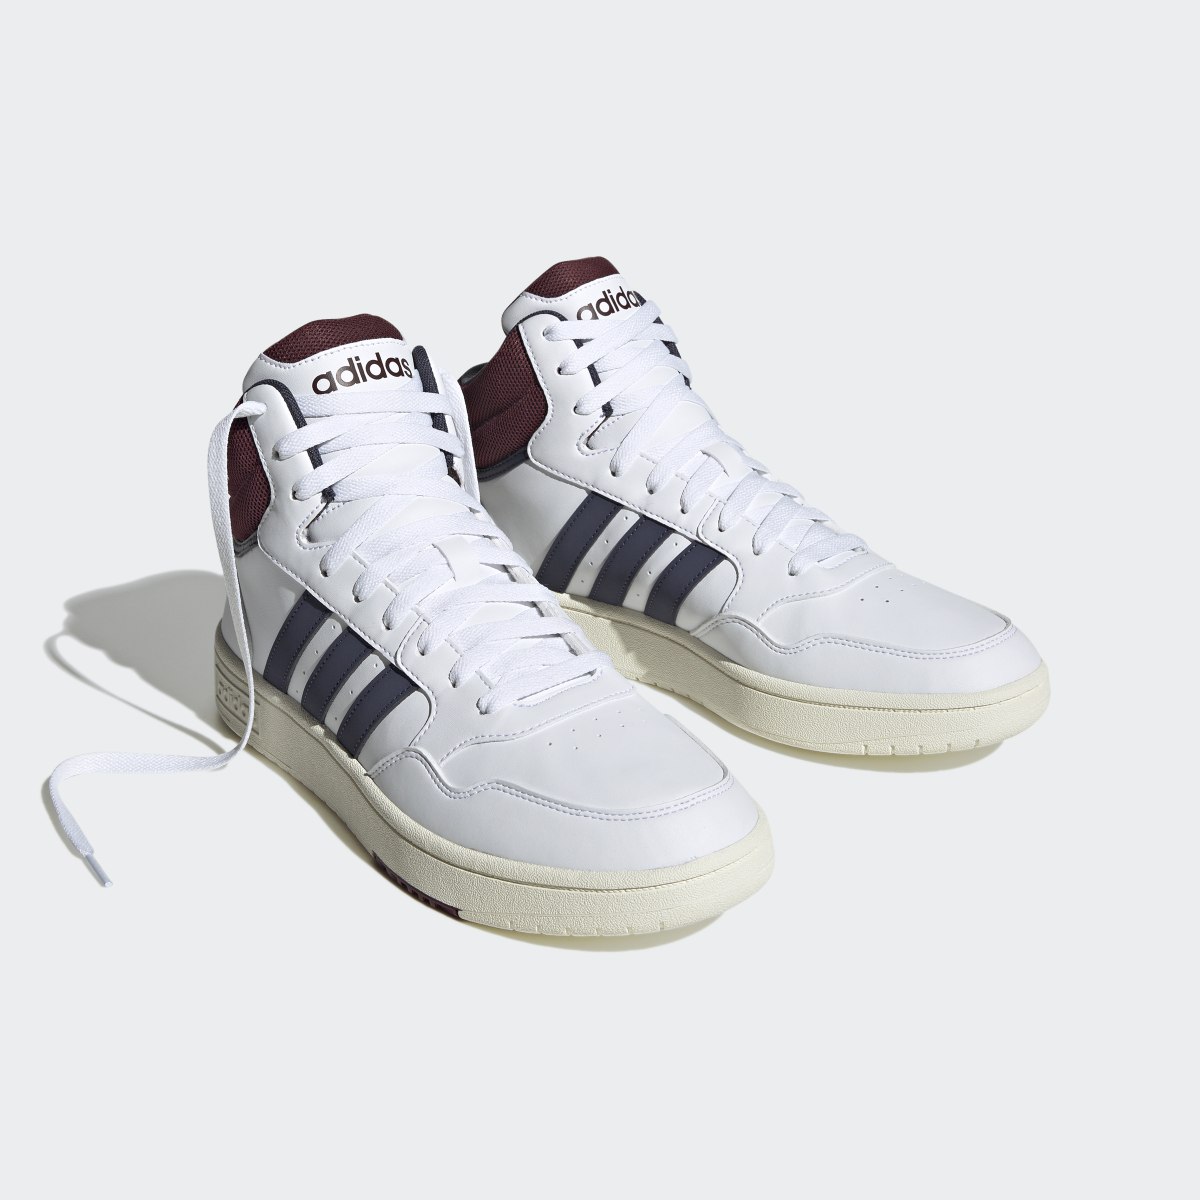 Adidas Hoops 3.0 Mid Lifestyle Basketball Classic Vintage Schuh. 5